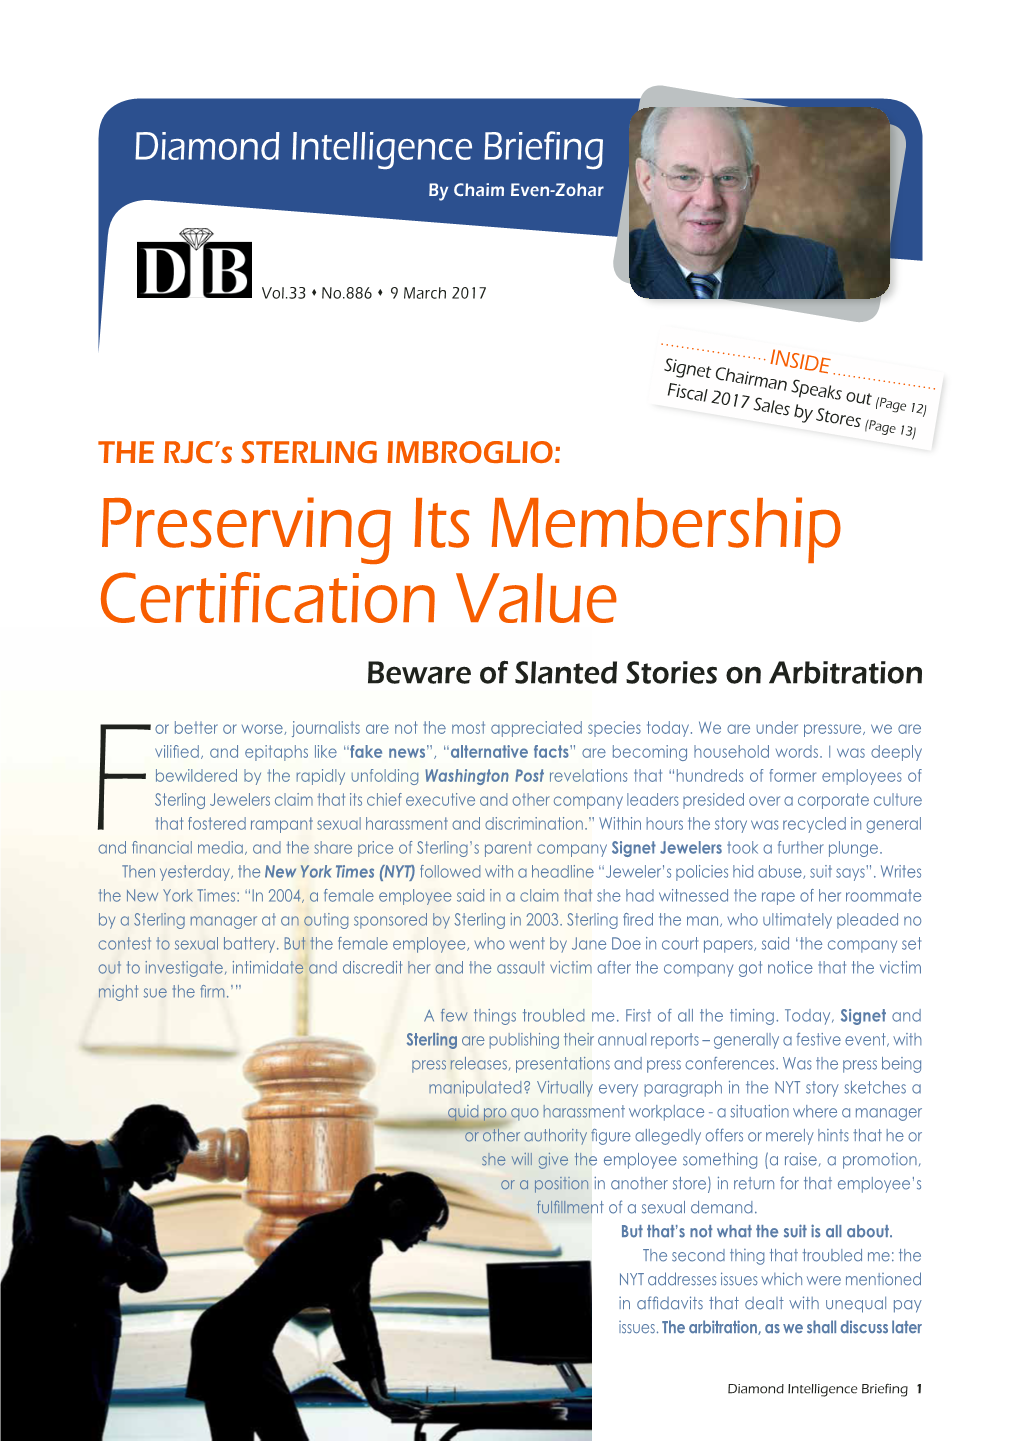 Preserving Its Membership Certification Value Beware of Slanted Stories on Arbitration